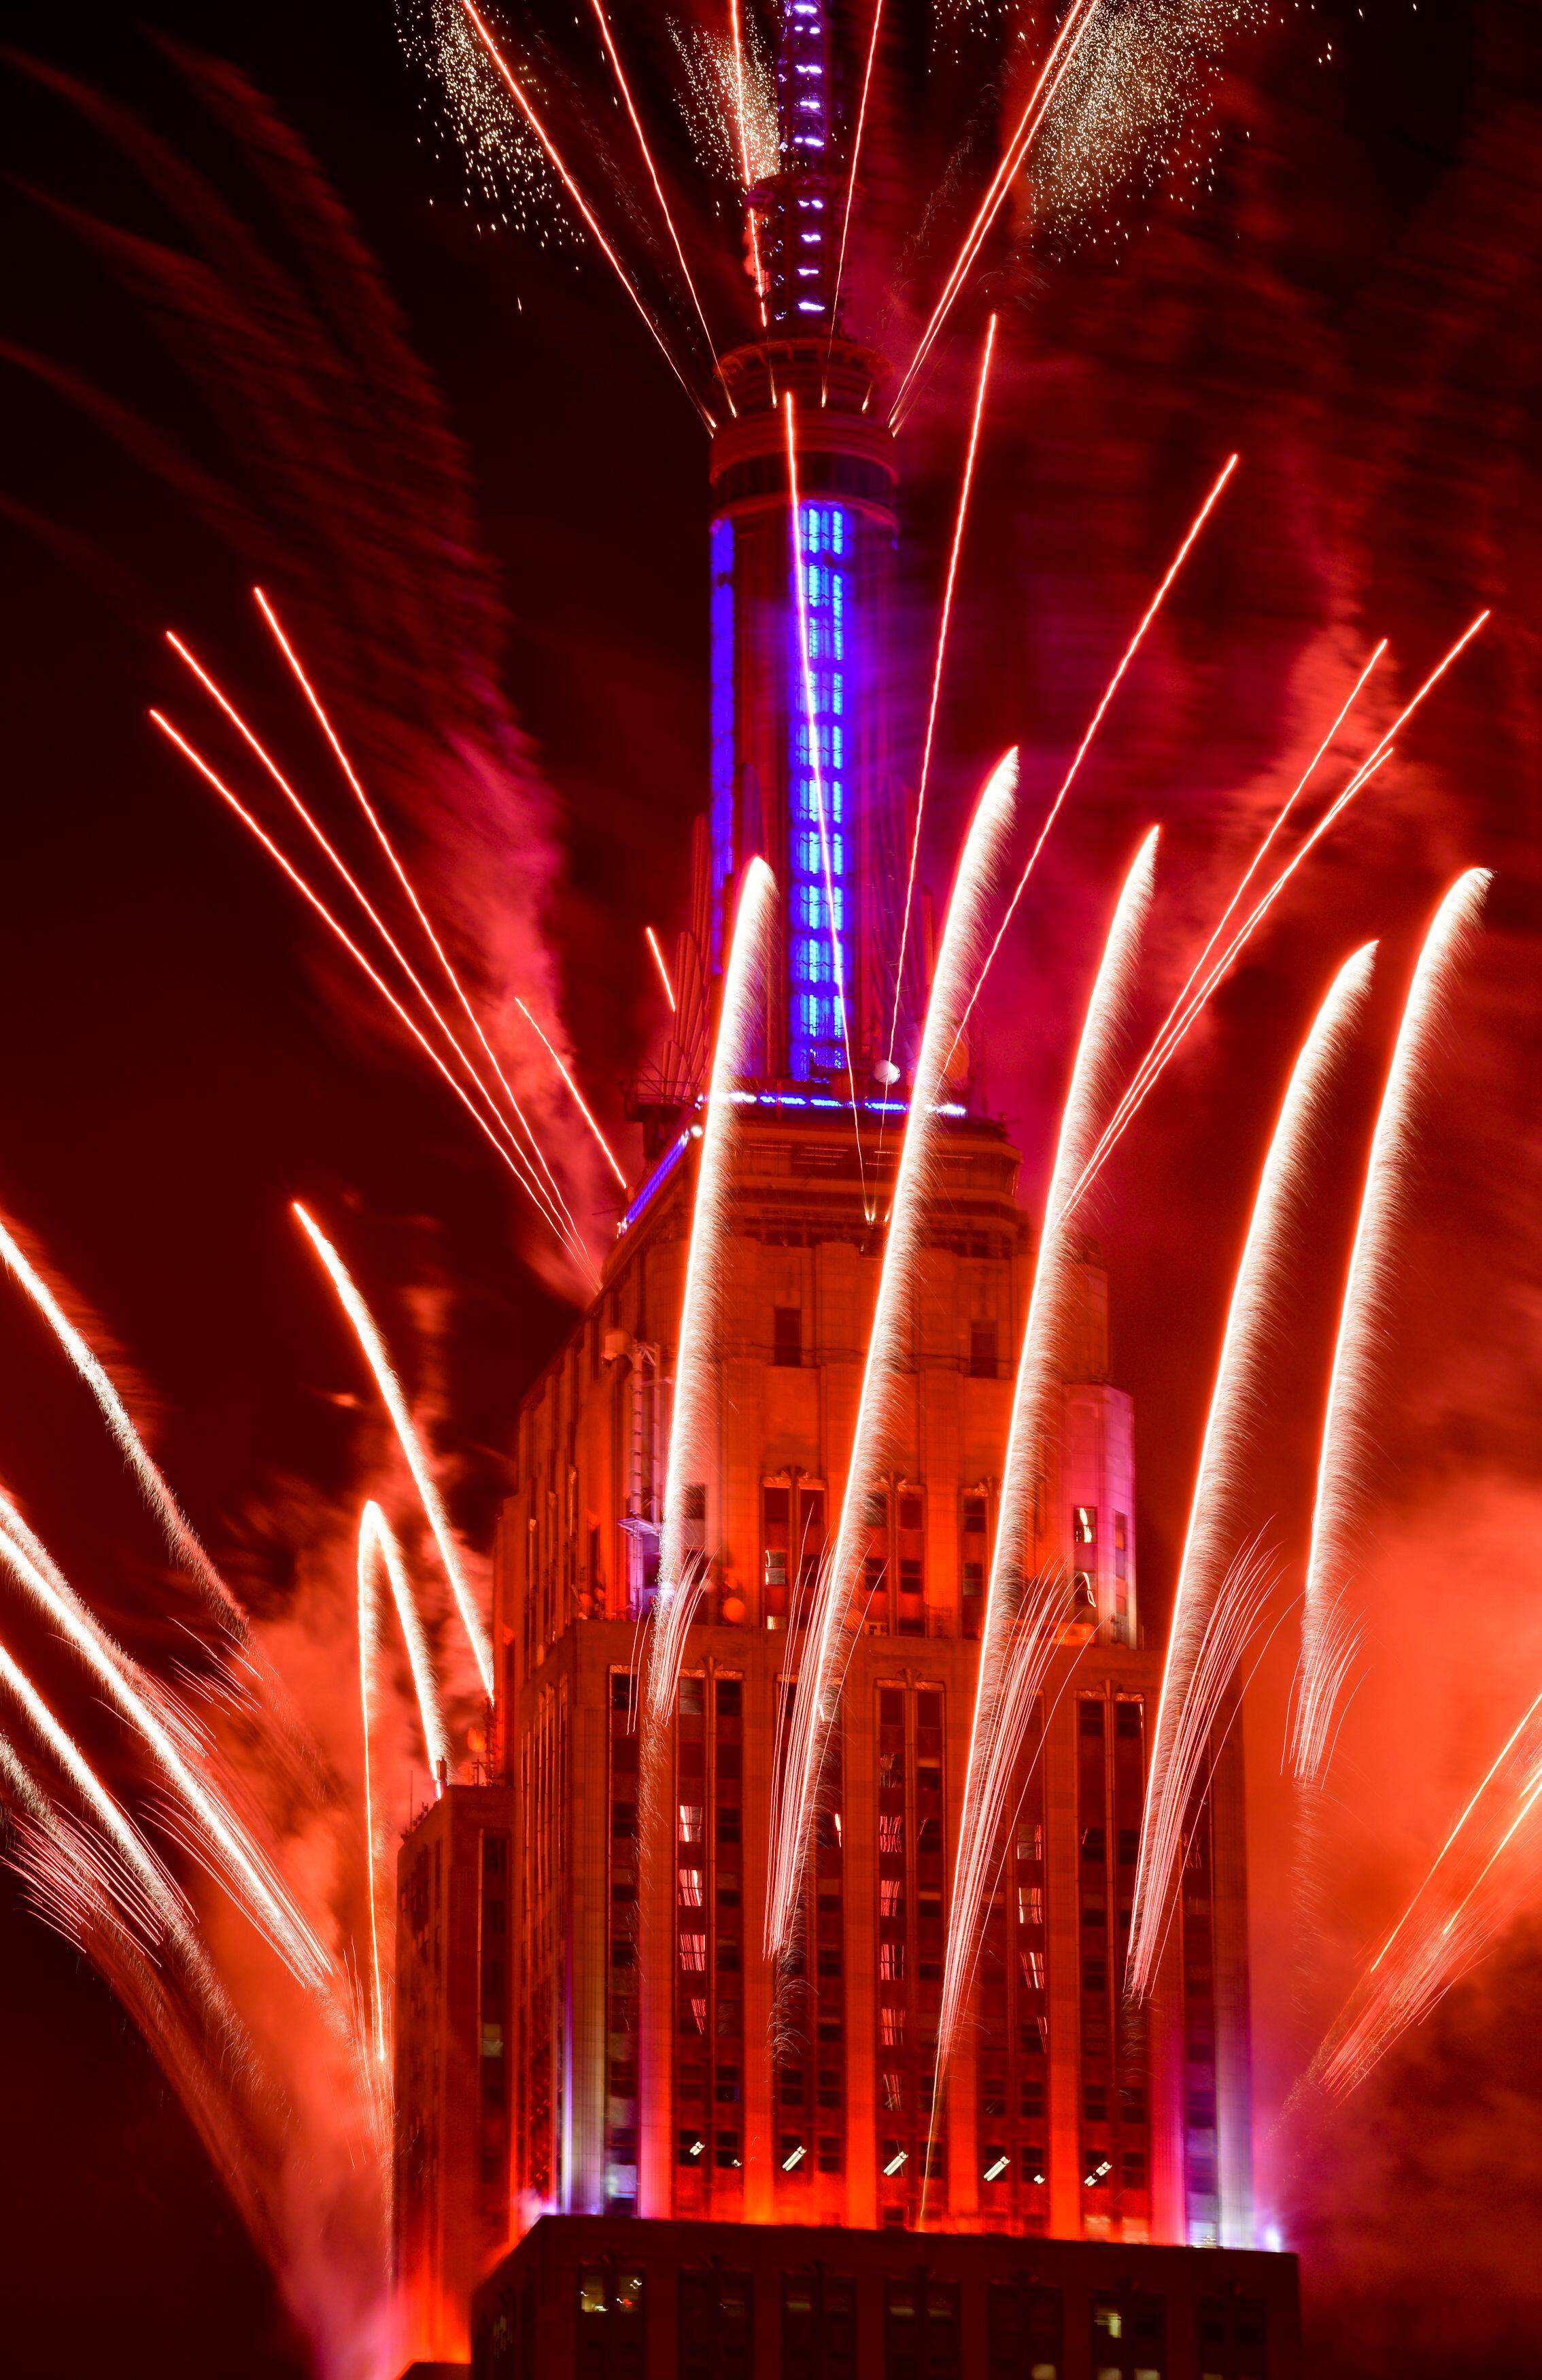 Can’t watch fireworks at home? Millions choose NBC